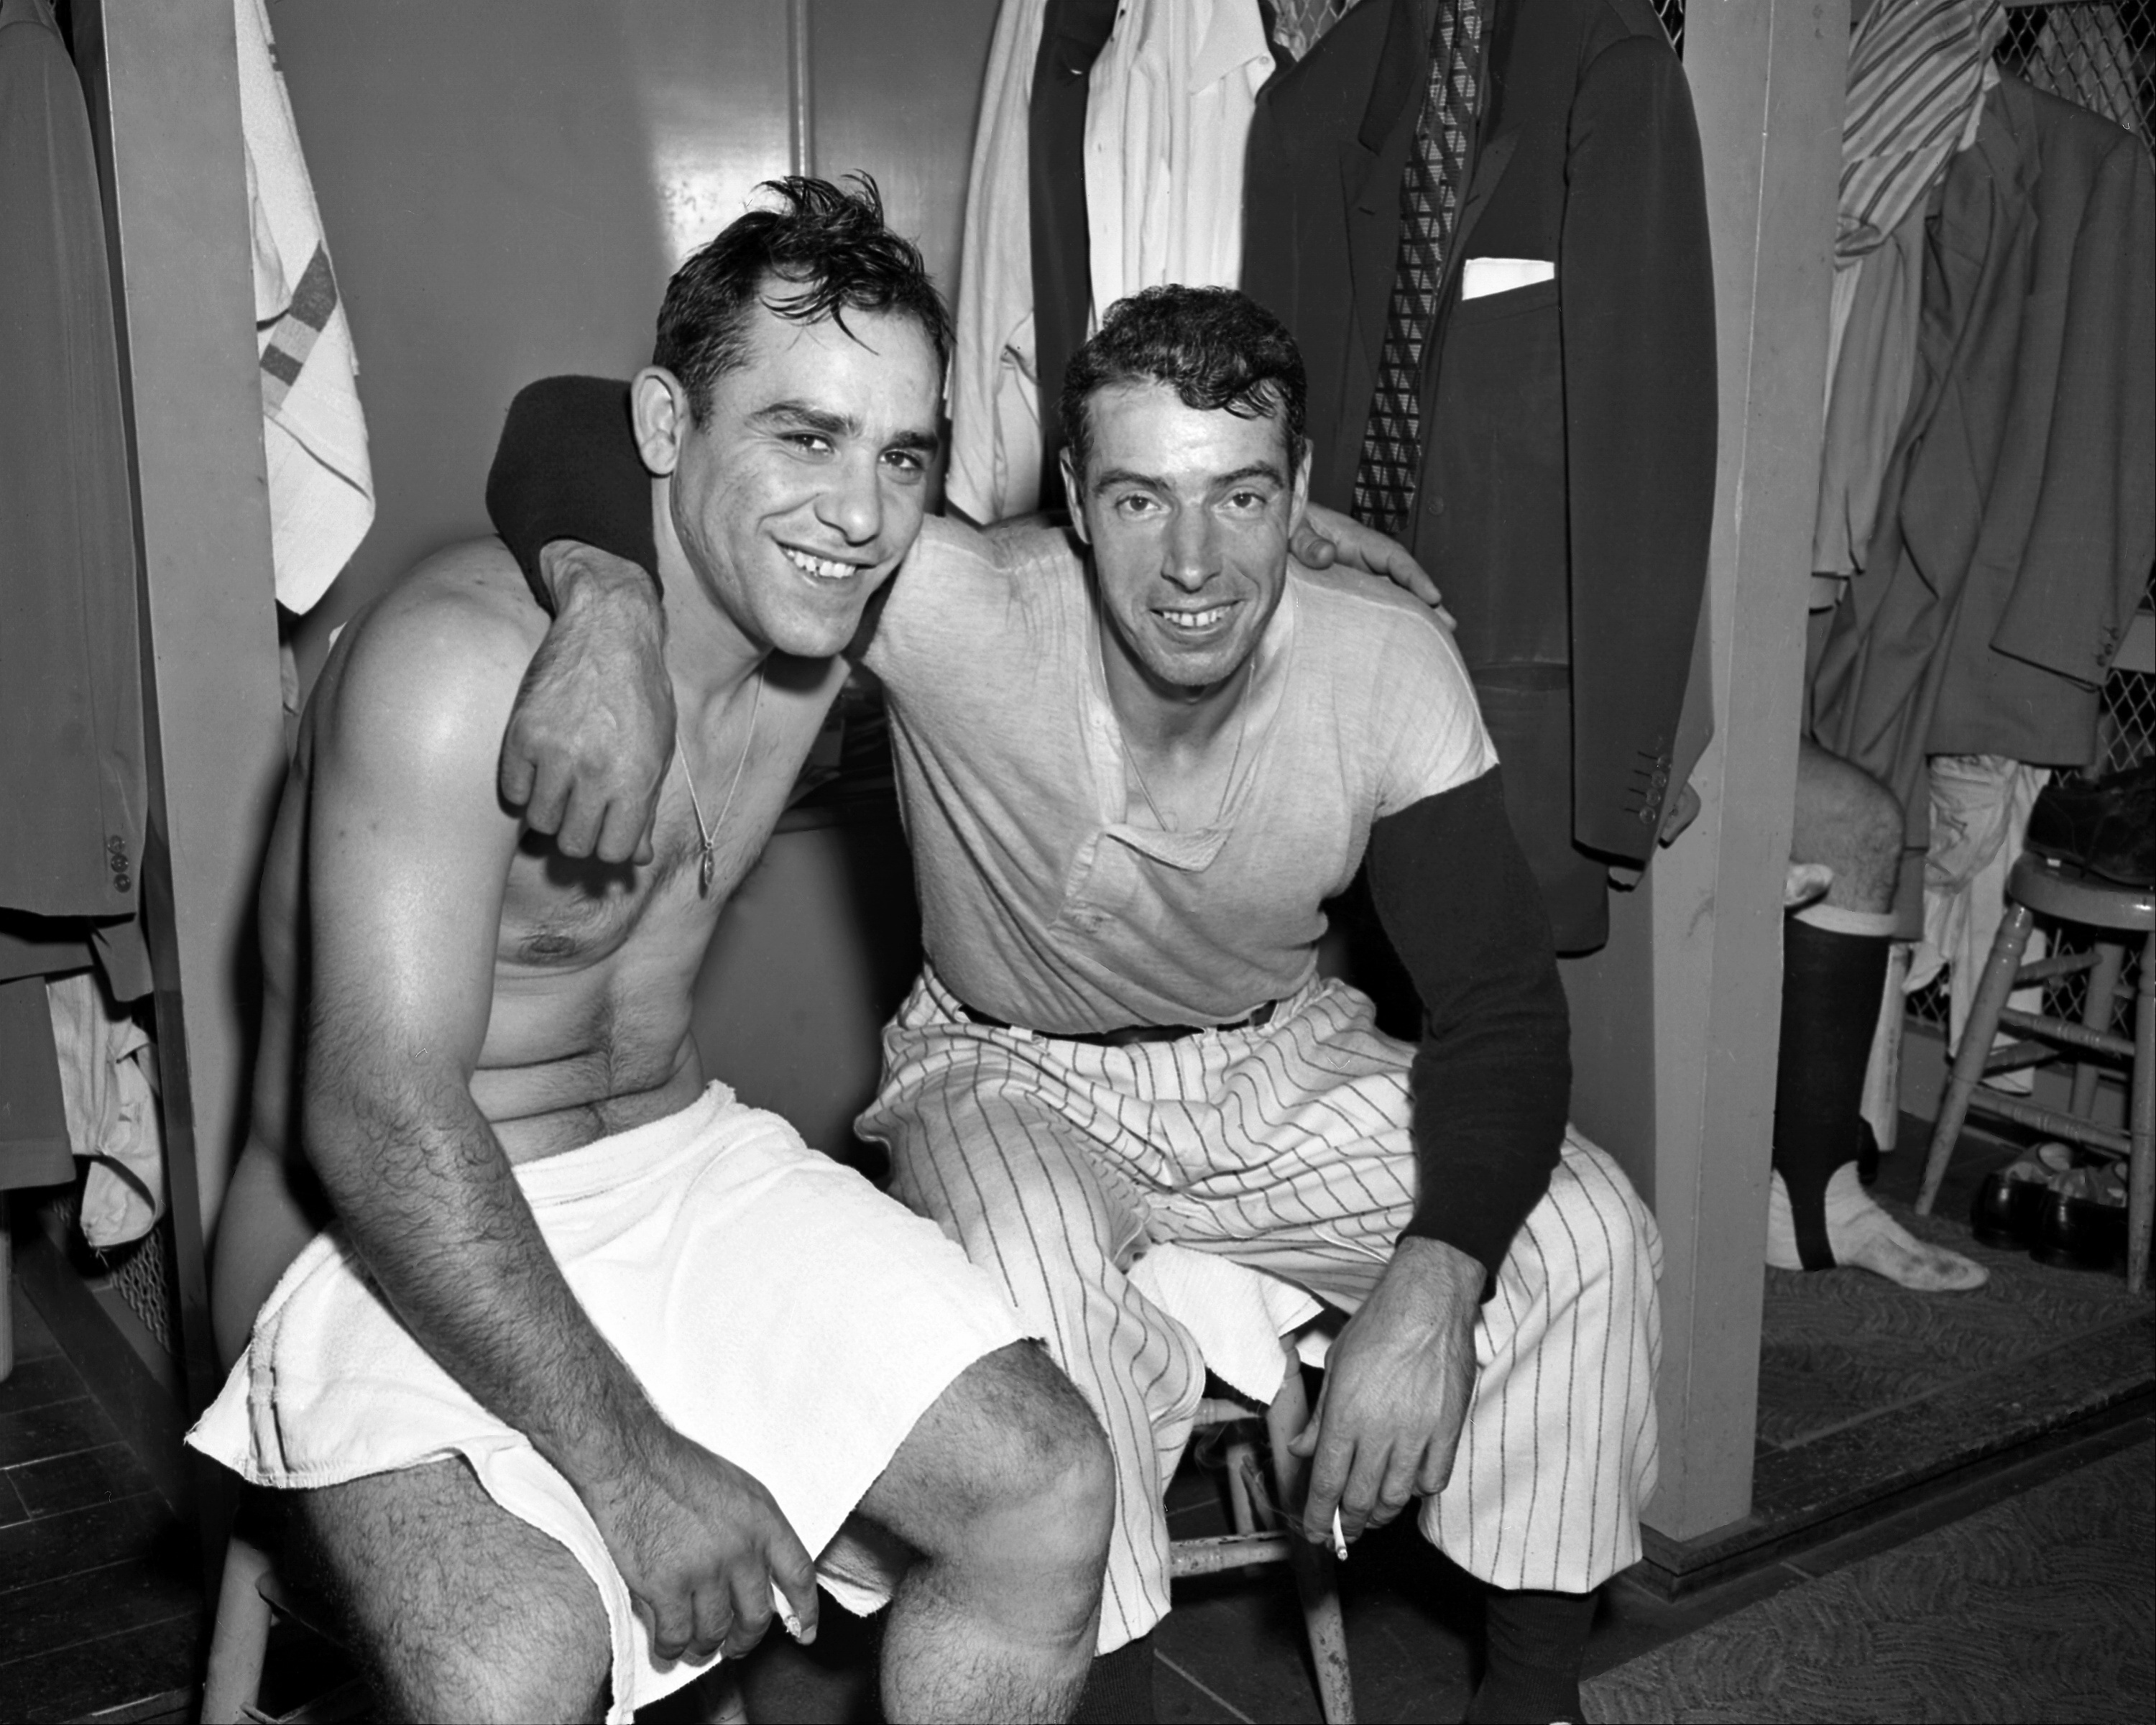 Yogi Berra and Joe DiMaggio celebrate at Stadium after Yankees sweep the Phillies in the 1950 World Series.